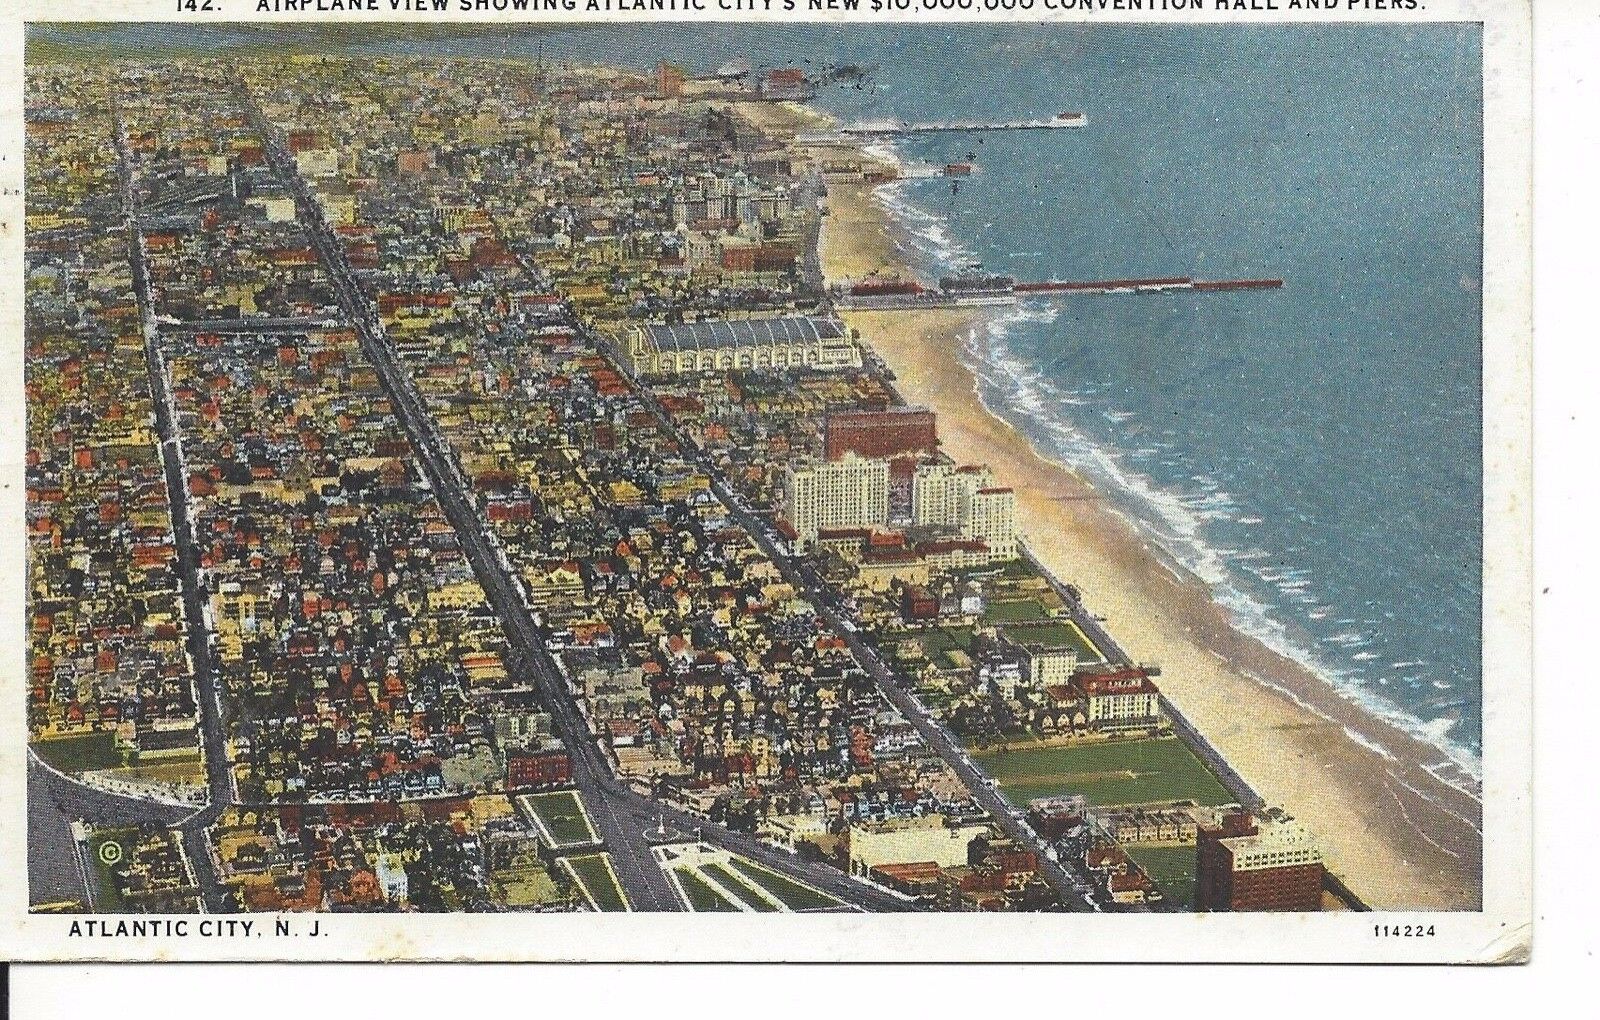 Atlantic City,NJ Airplane View Showing New $10,000,000 Convention Hall and Piers